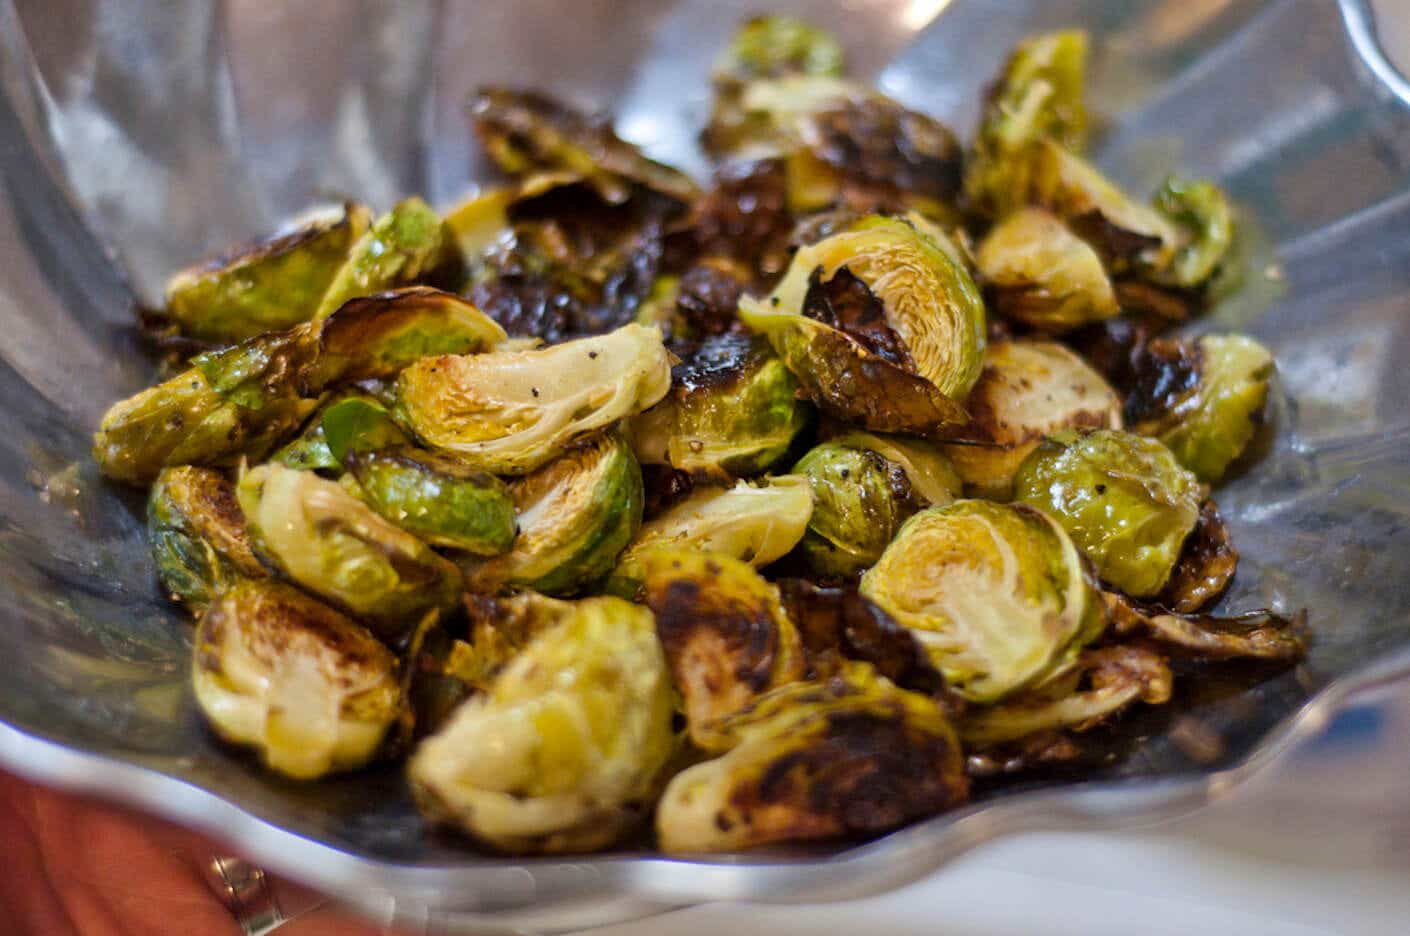 A bowl of roasted Brussels sprouts served as a side dish.